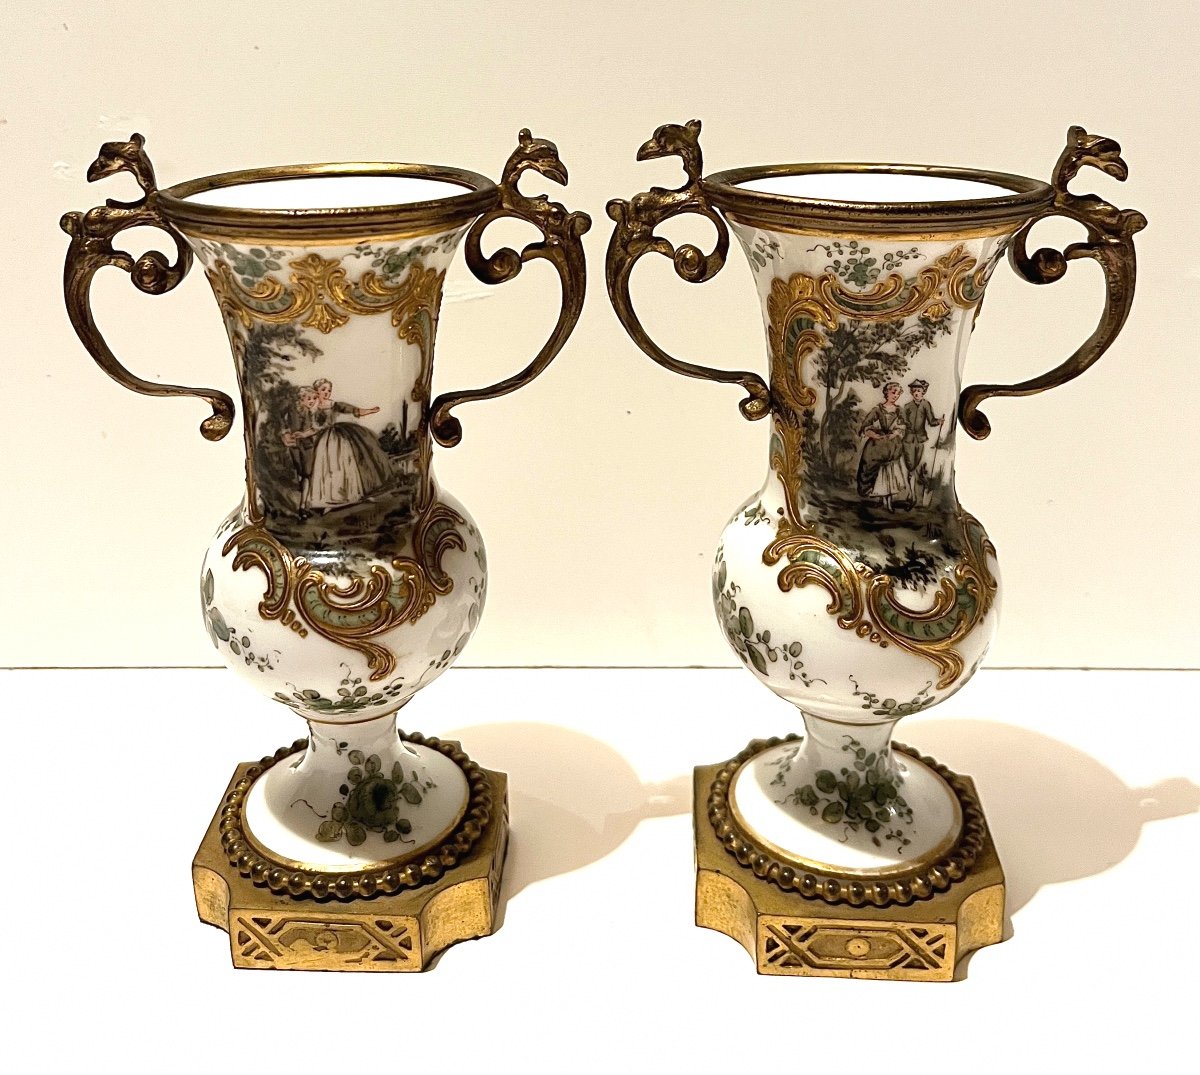 Pair Of Small Vases In Sèvres Or Paris Porcelain And Bronze 